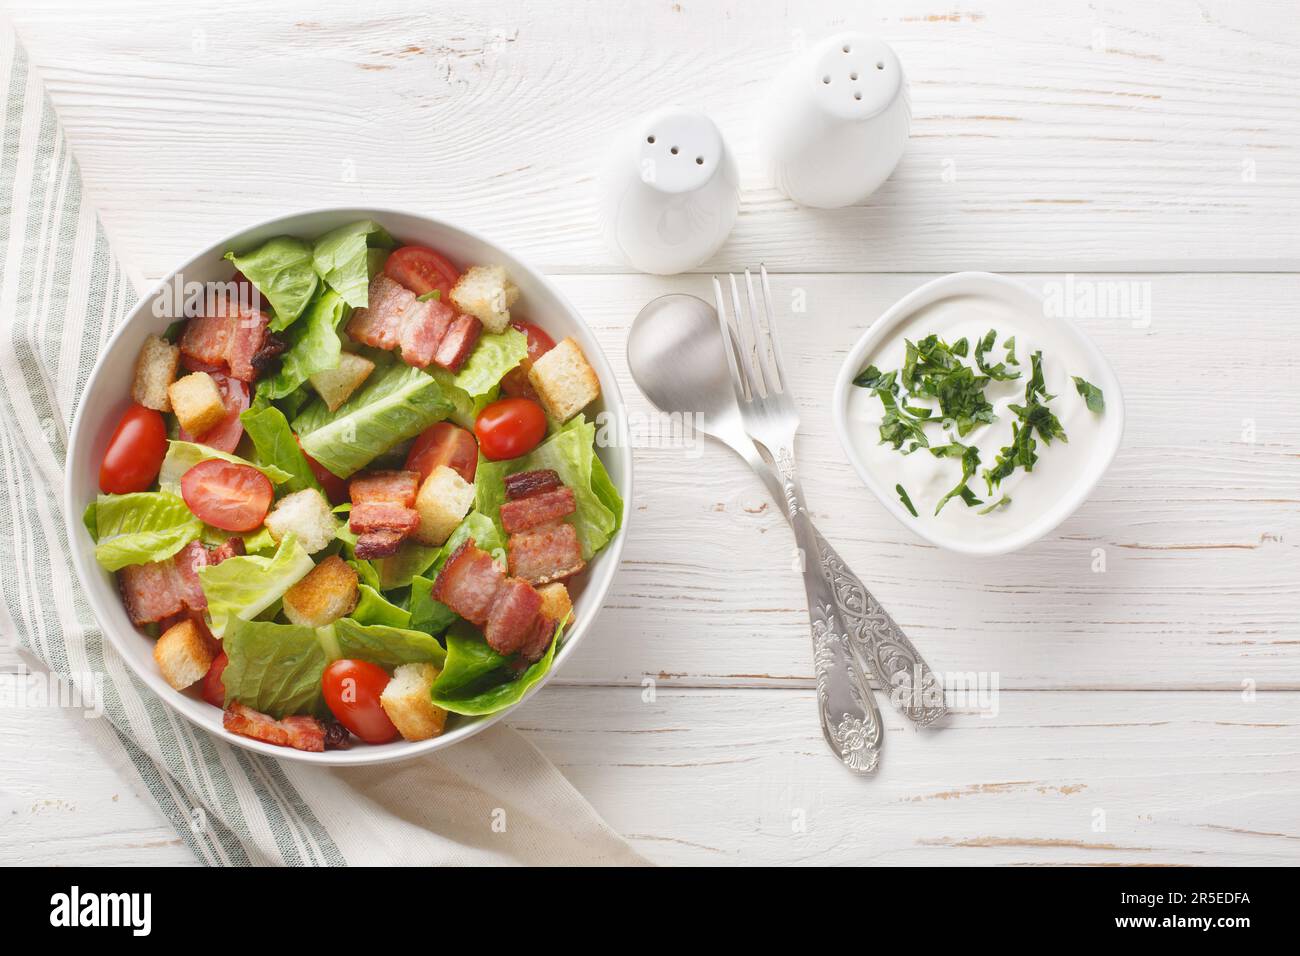 BLT Salad has a homemade ranch dressing, crispy bacon, croutons, lettuce and tomato closeup on the plate on the table. Horizontal top view from above Stock Photo